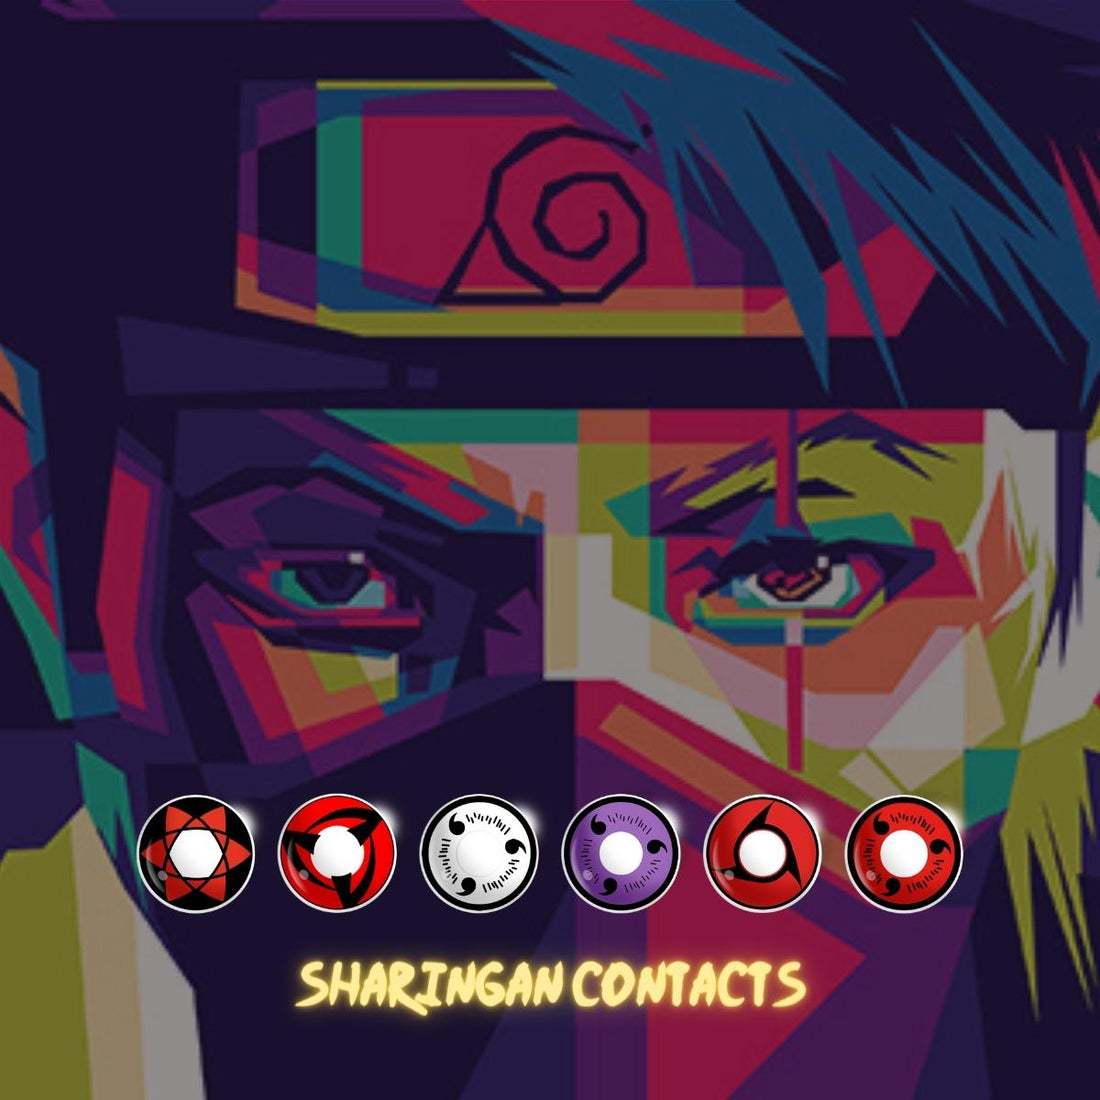 Sharingan Contact Lenses: Spice Up Your Costume and Join the Uchiha Clan